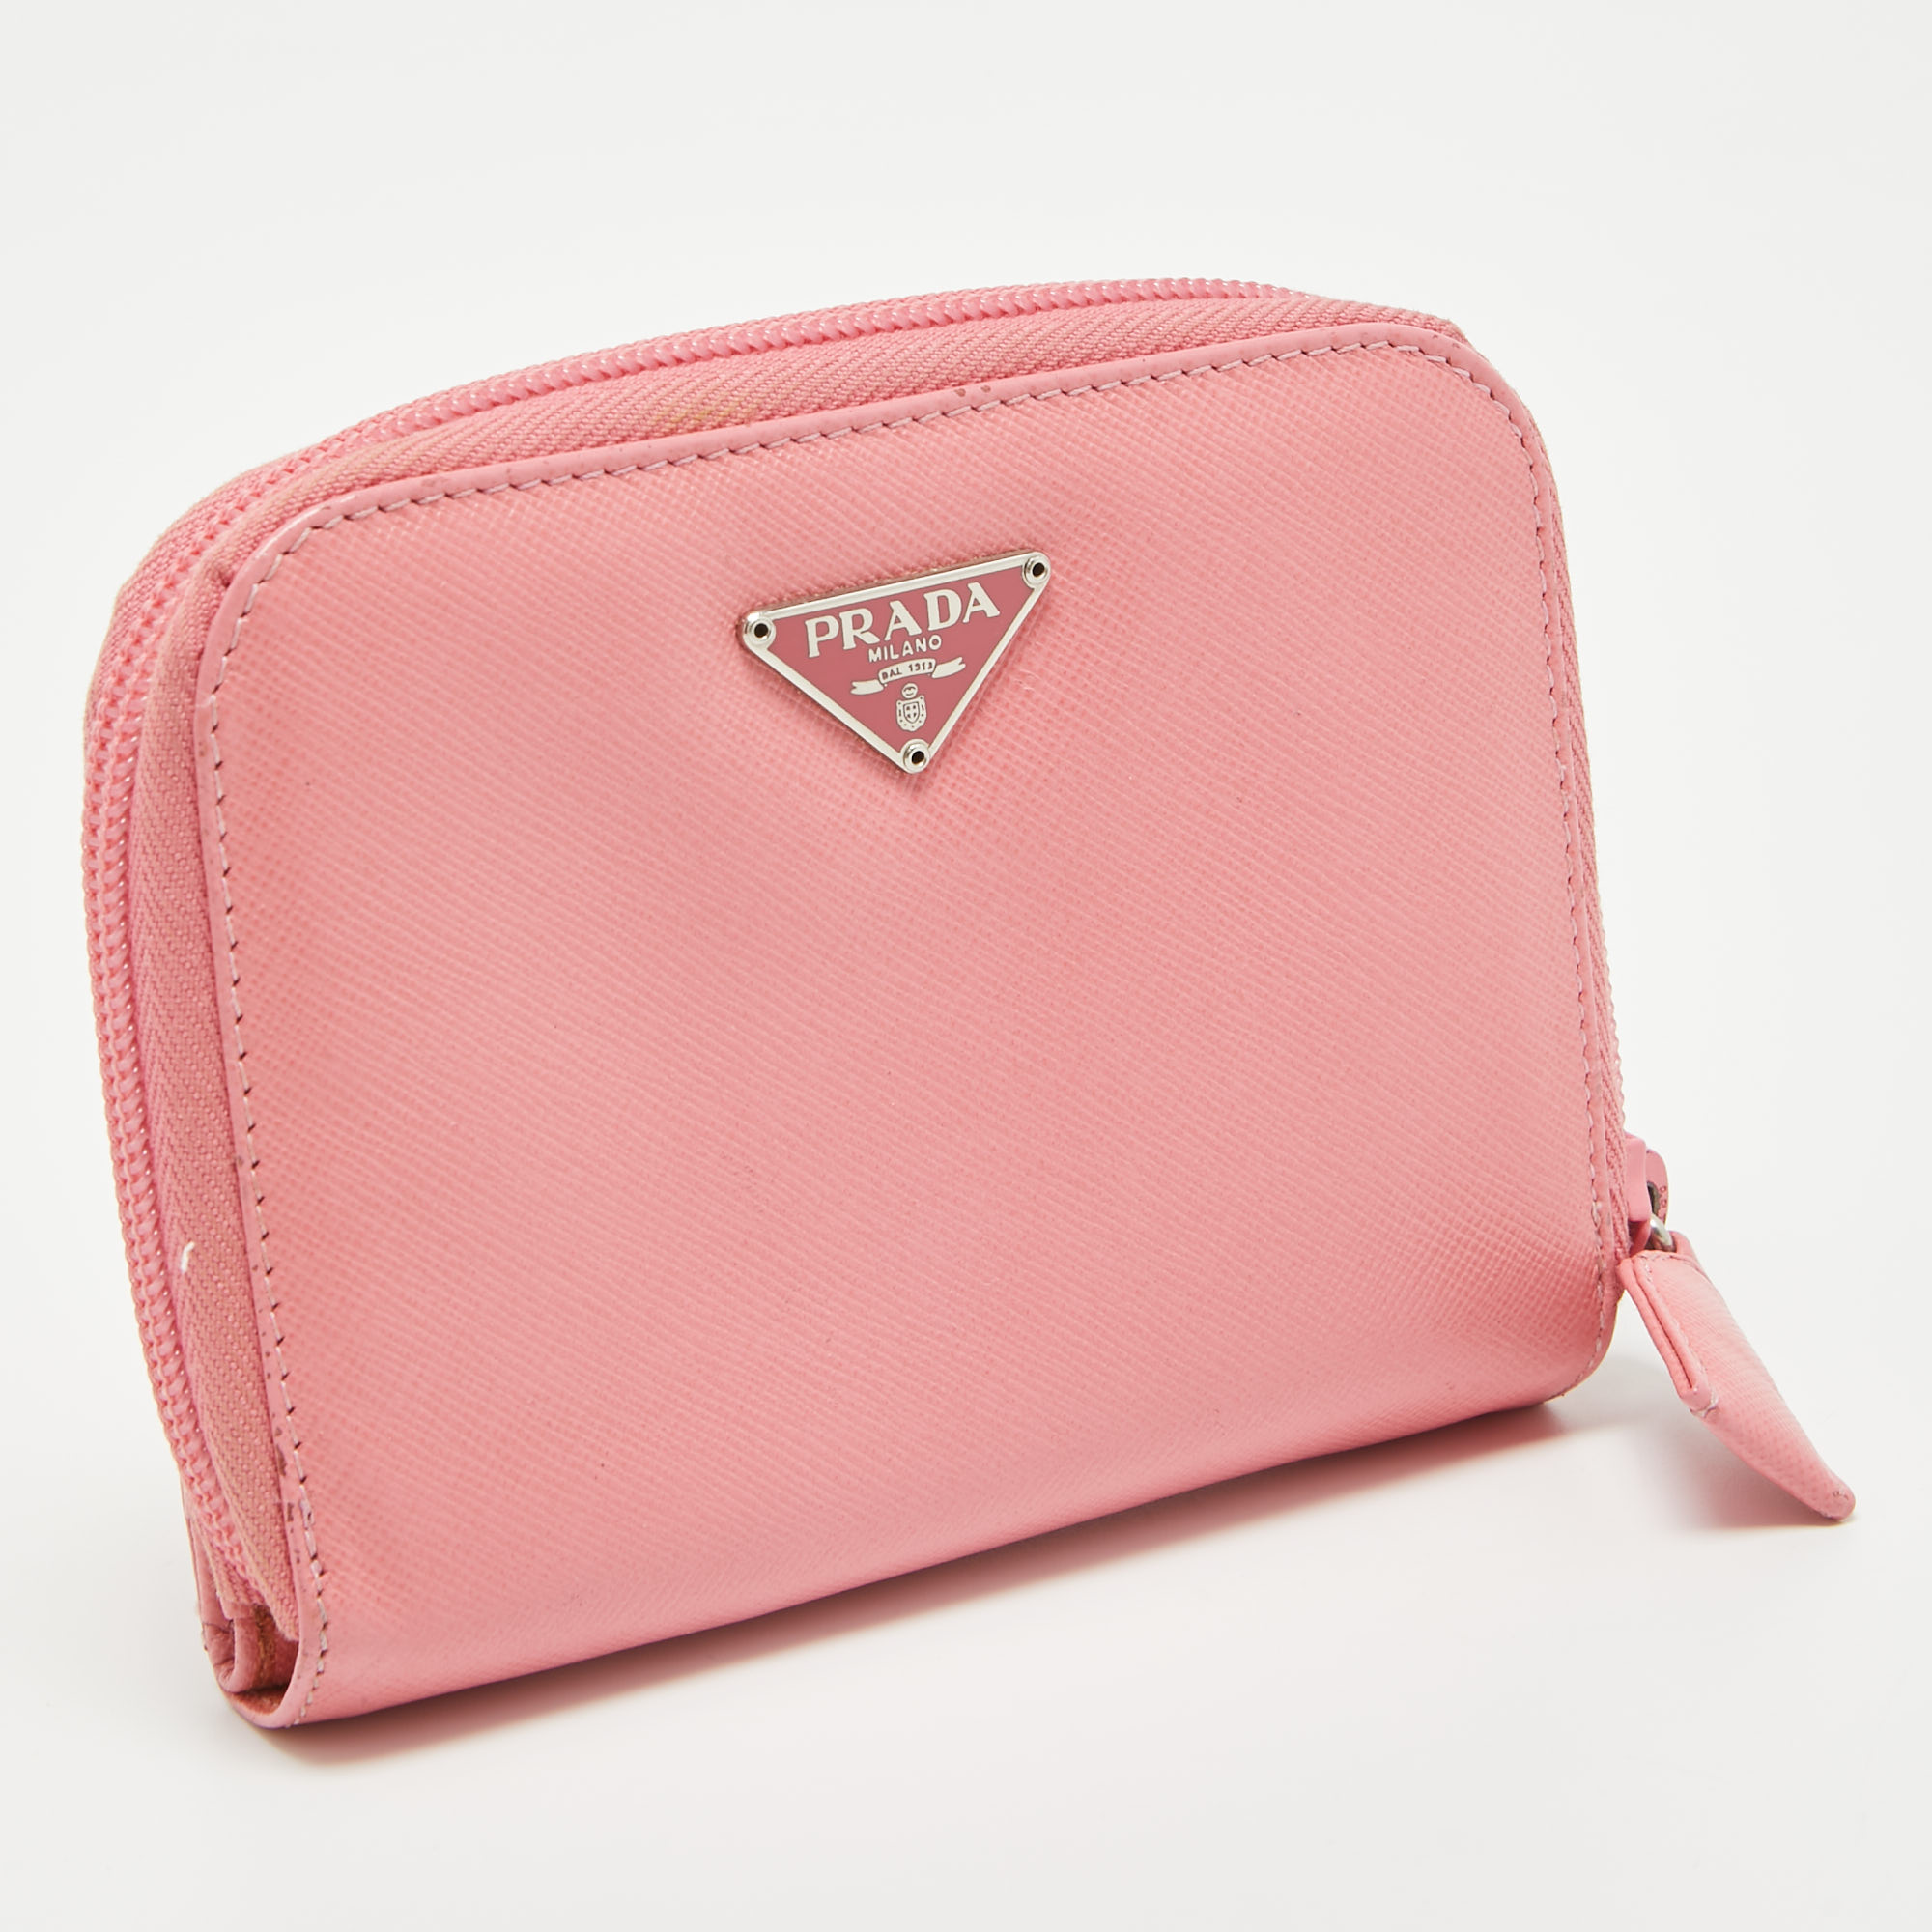 Prada Pink Saffiano Leather Zip French Wallet